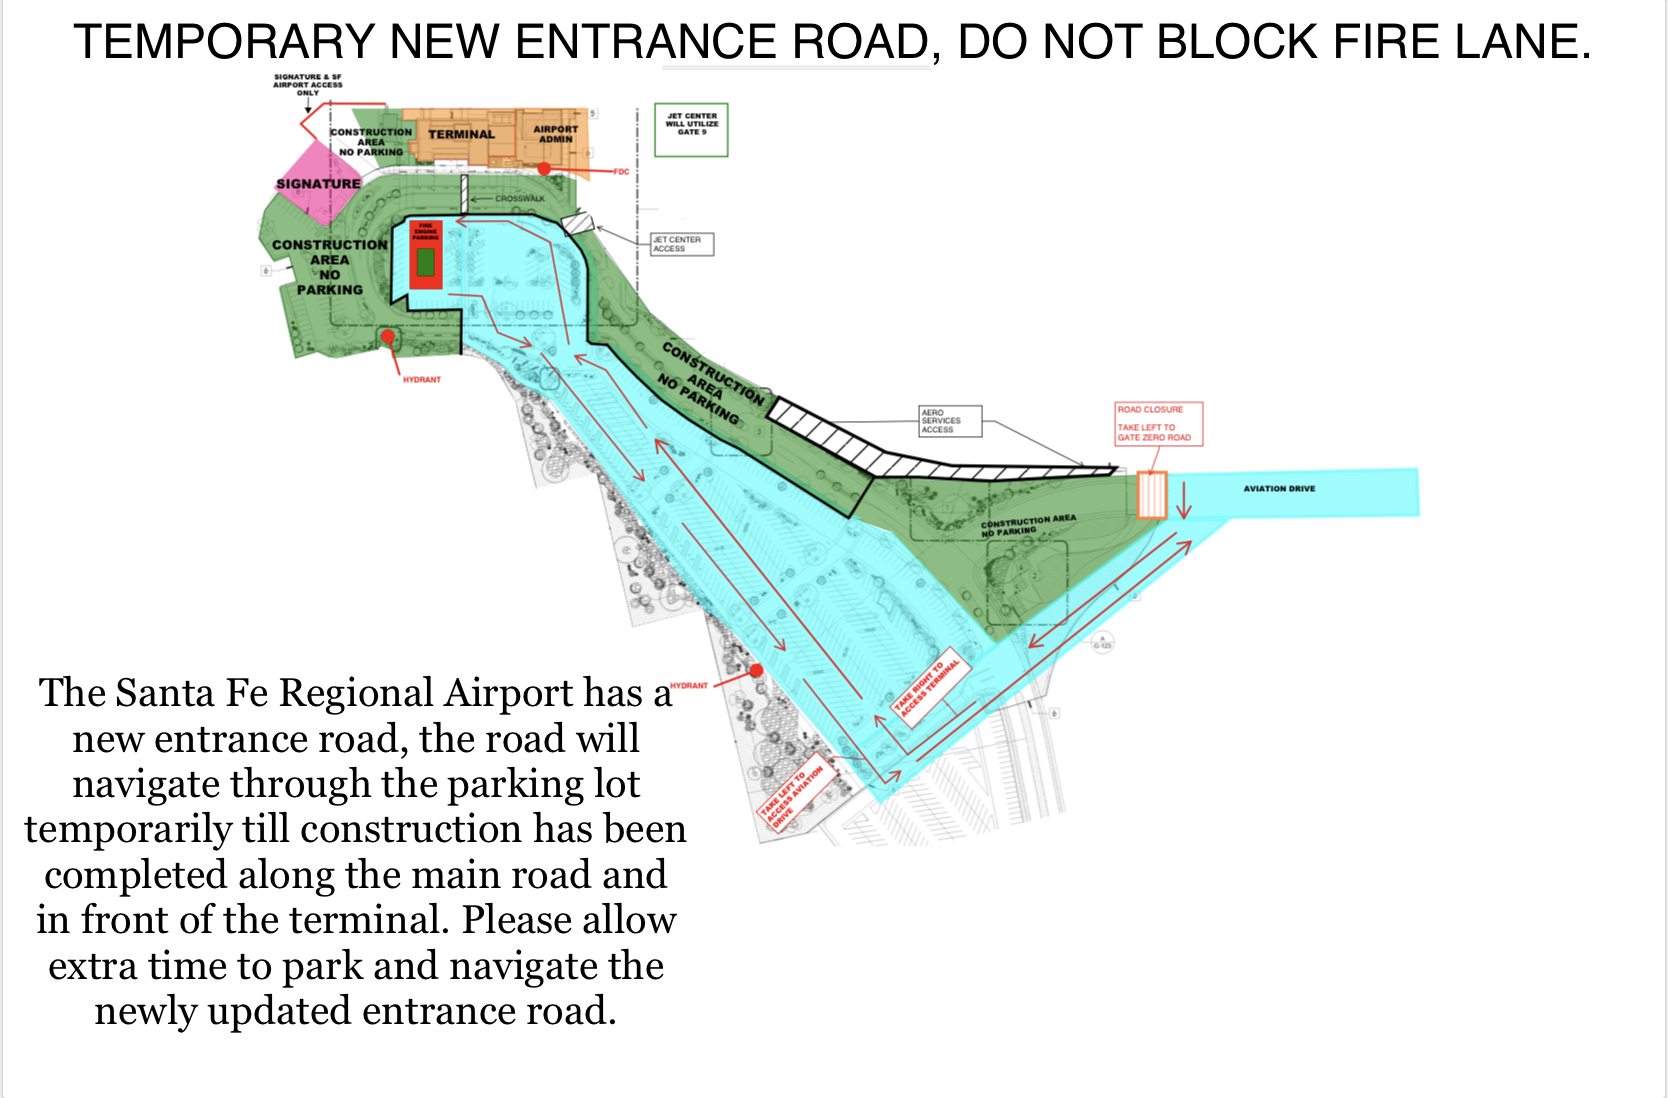 Map of the airport showing the temporary entrance road